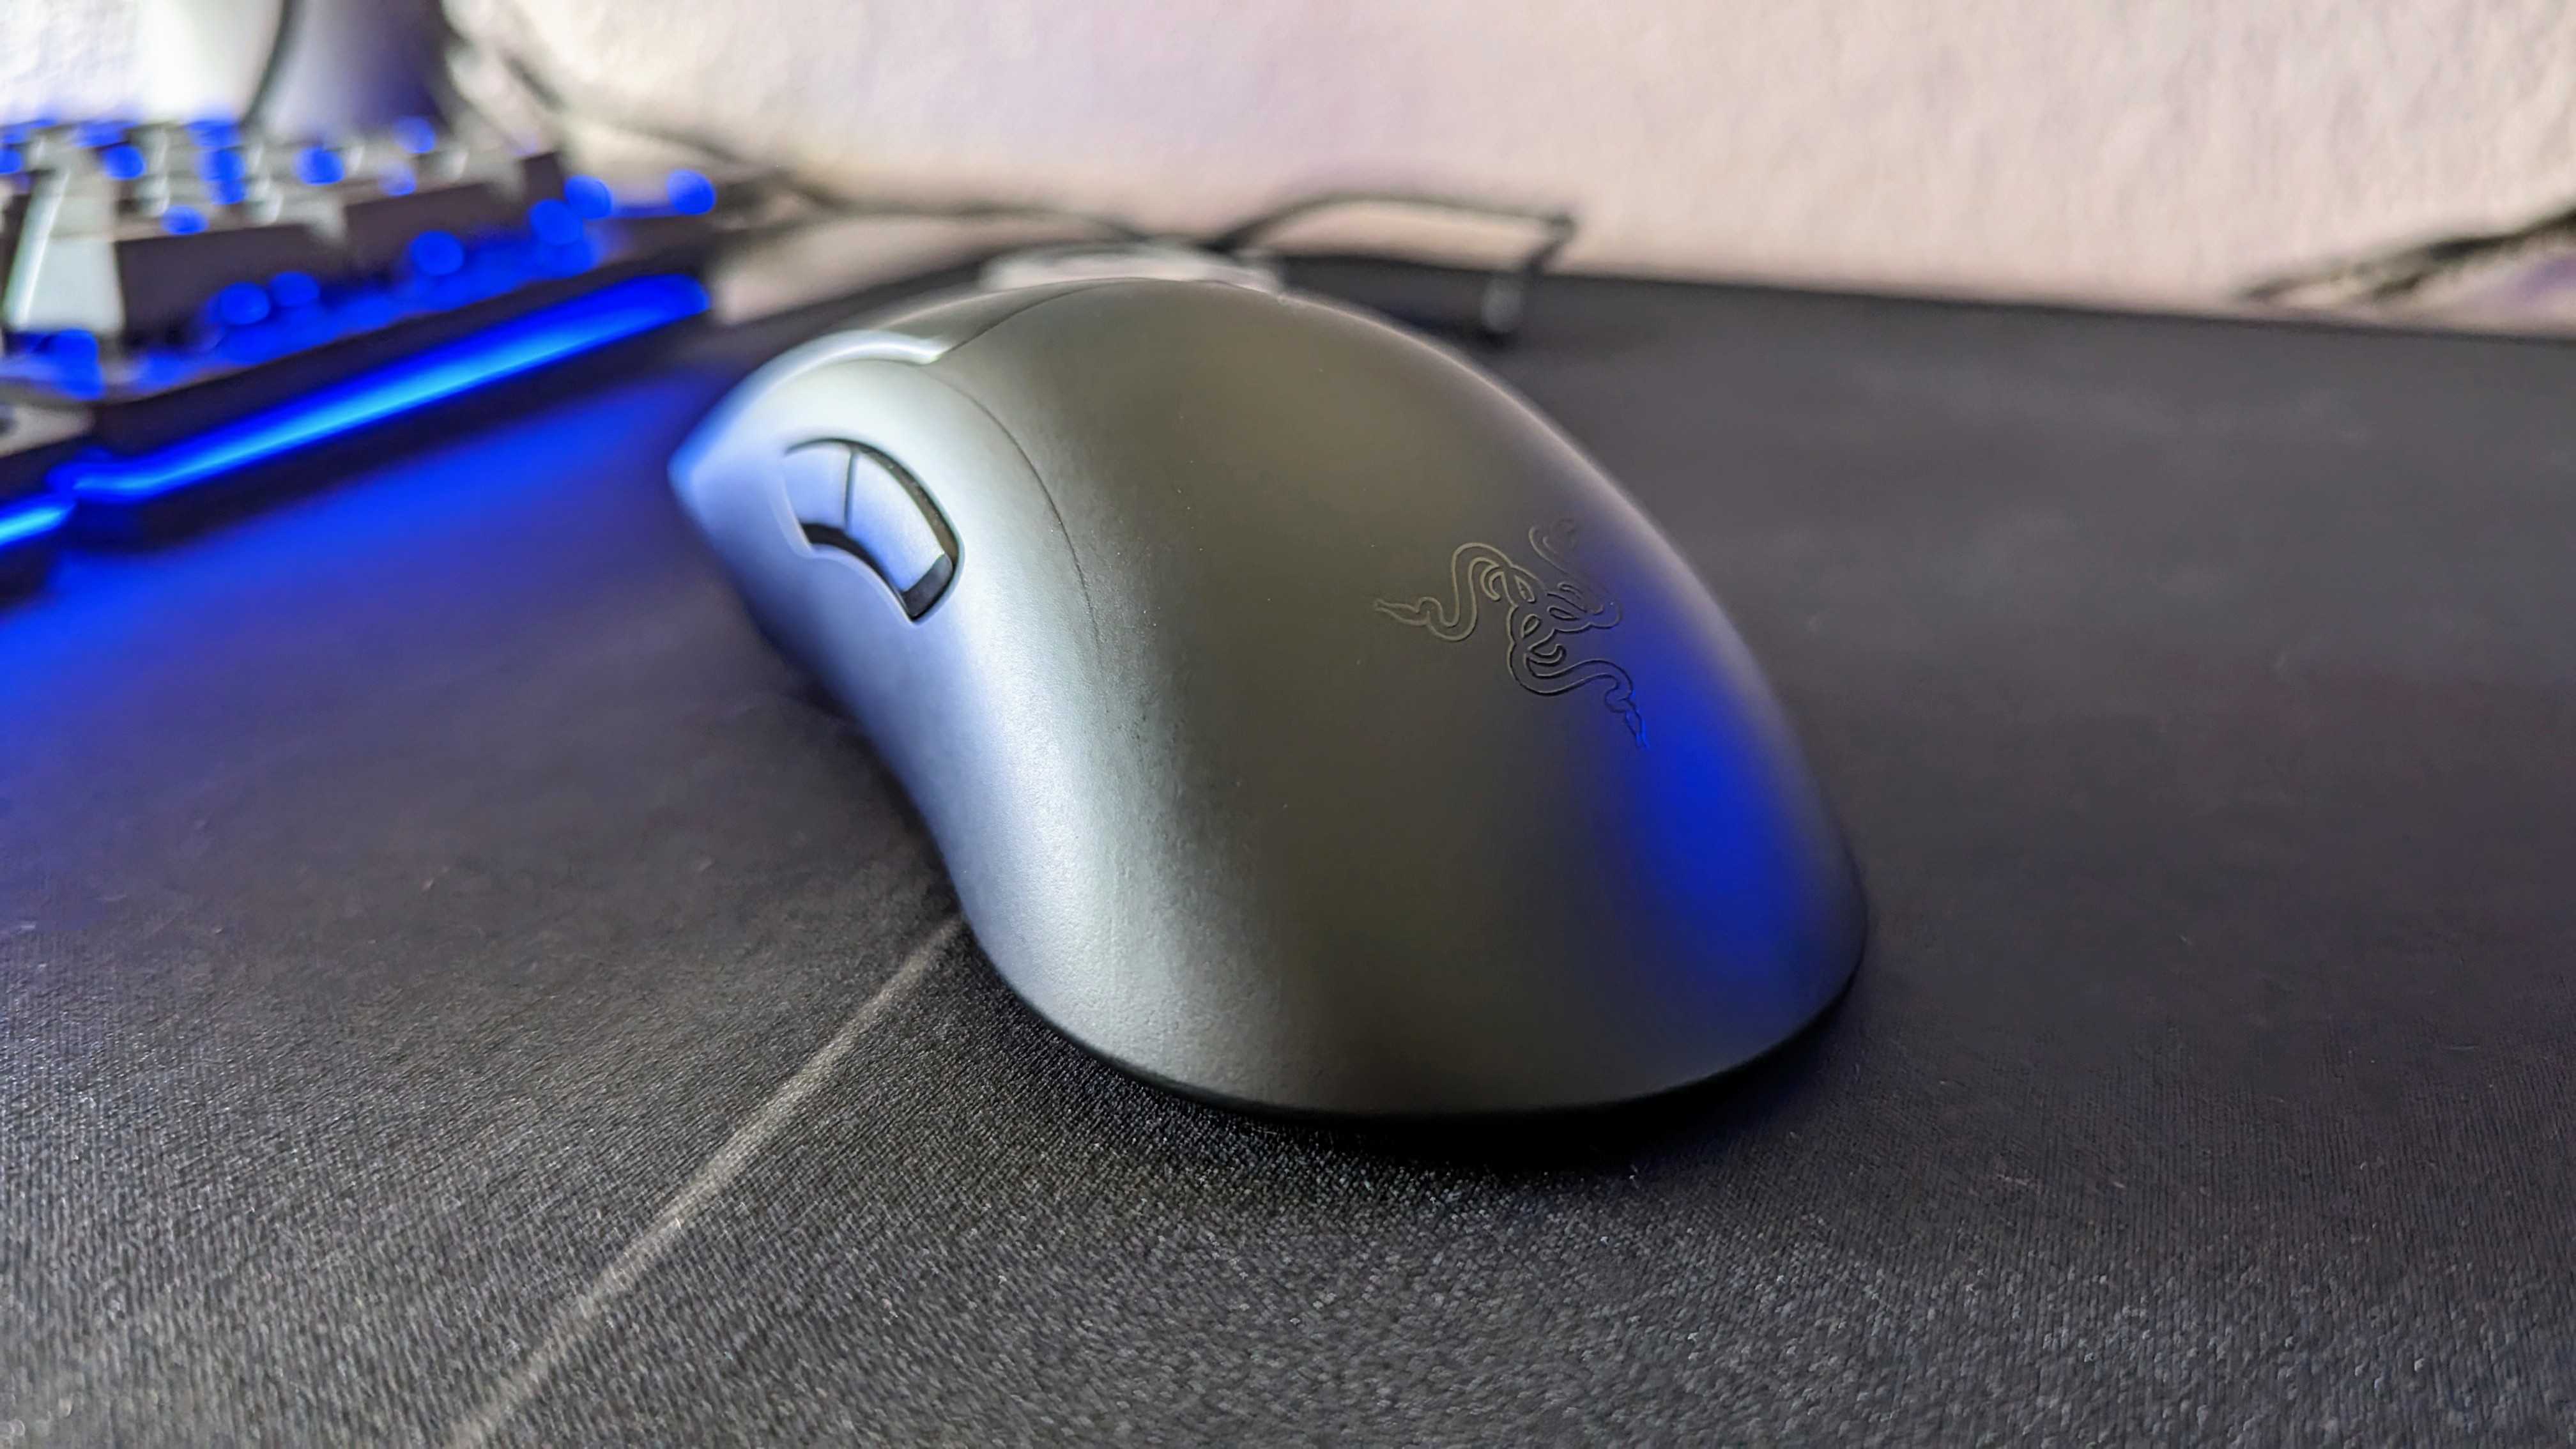 The Razer DeathAdder V3 on a mousepad, seen from the rear.